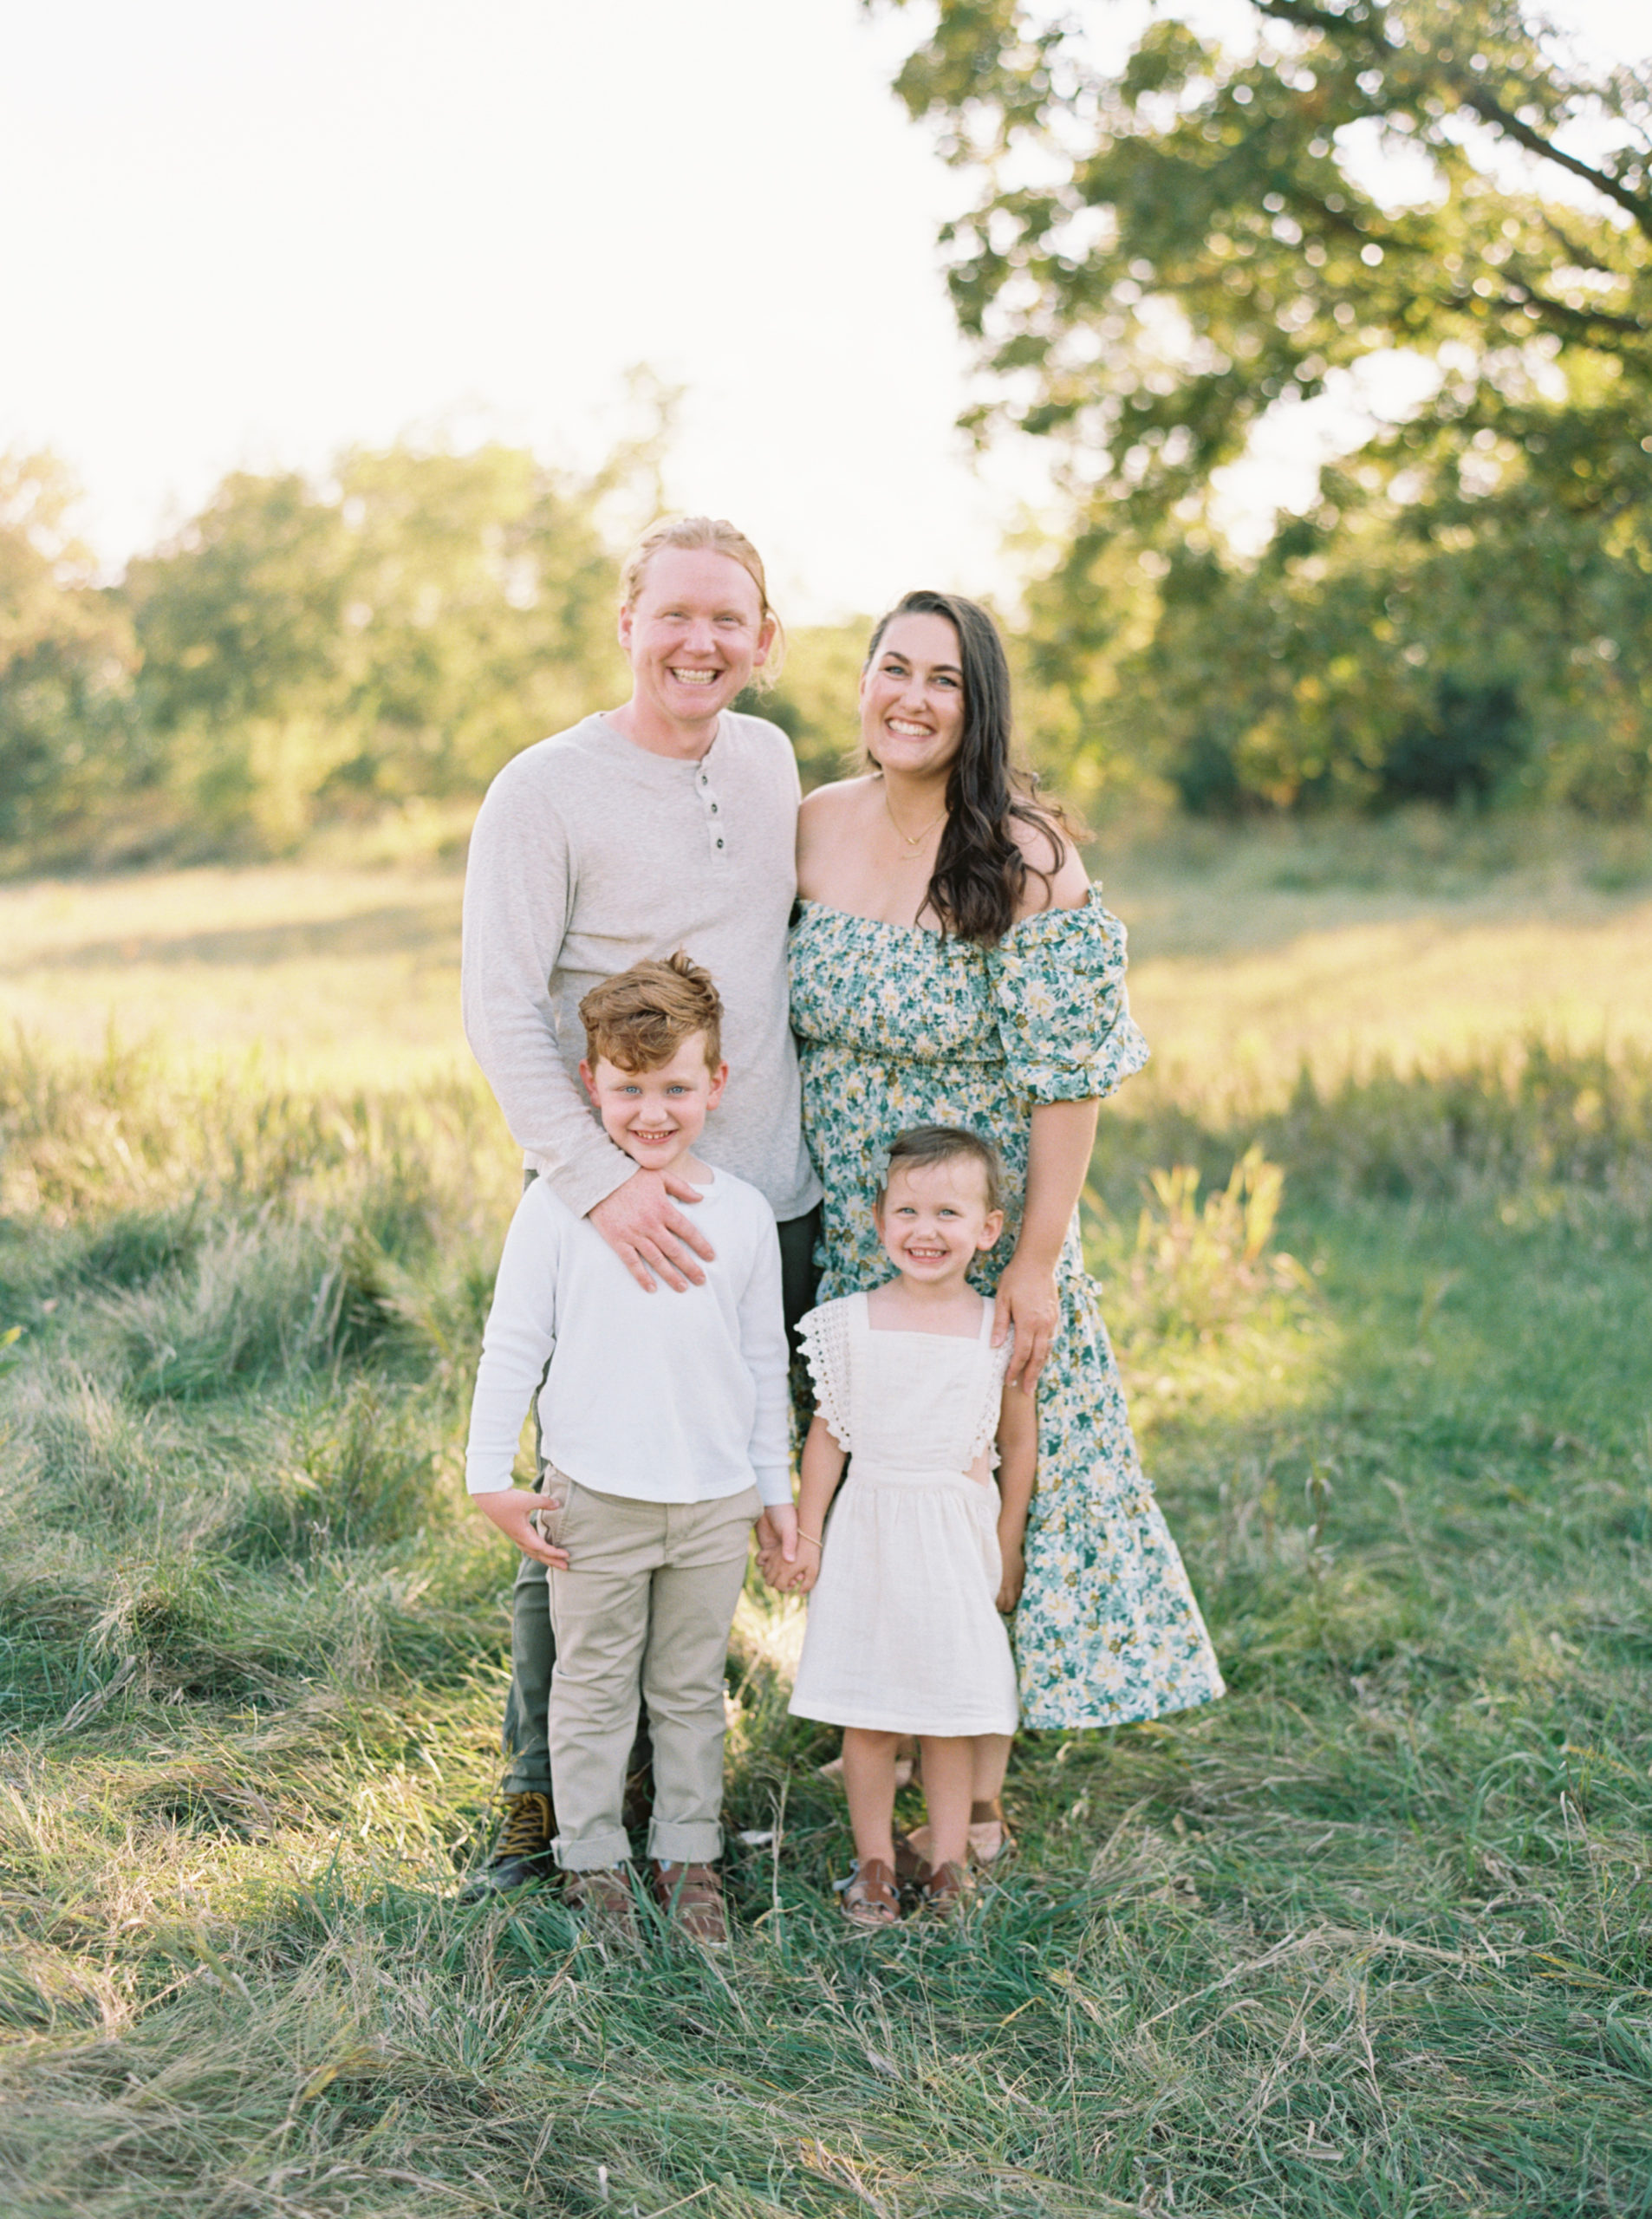 family portrait in a grassy green field setting in Shorewood in the summer